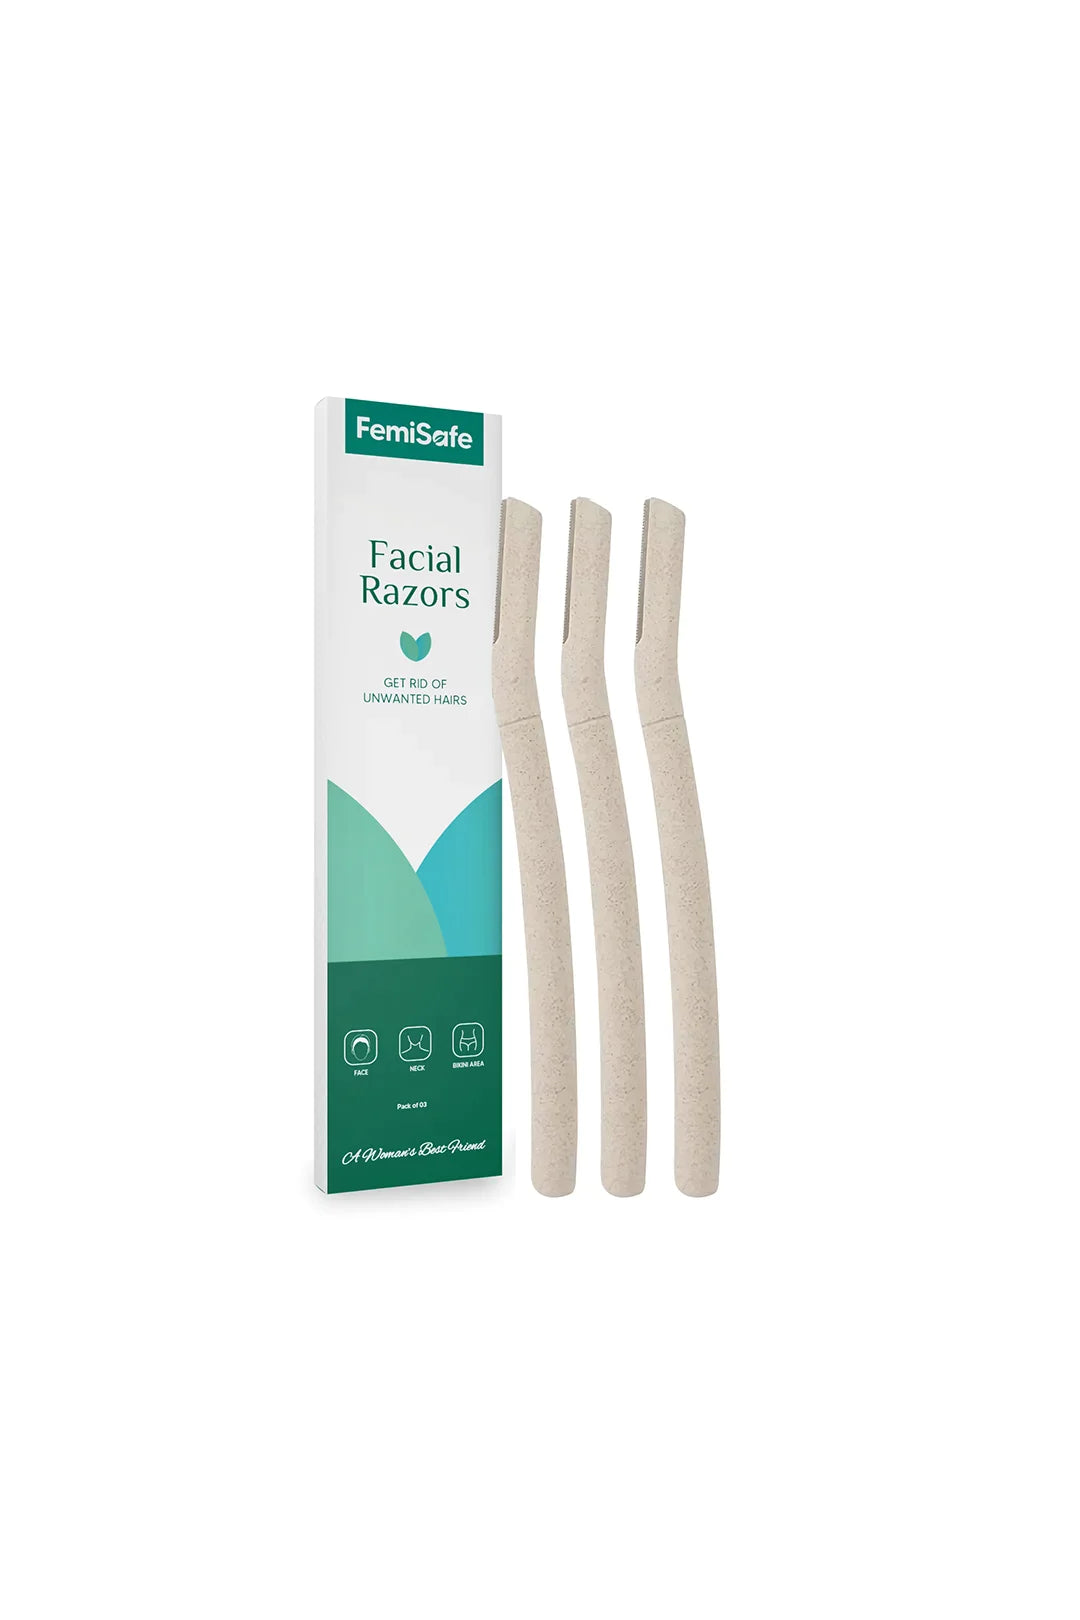 Wheat Straw facial razor(Pack of 2 and 3)